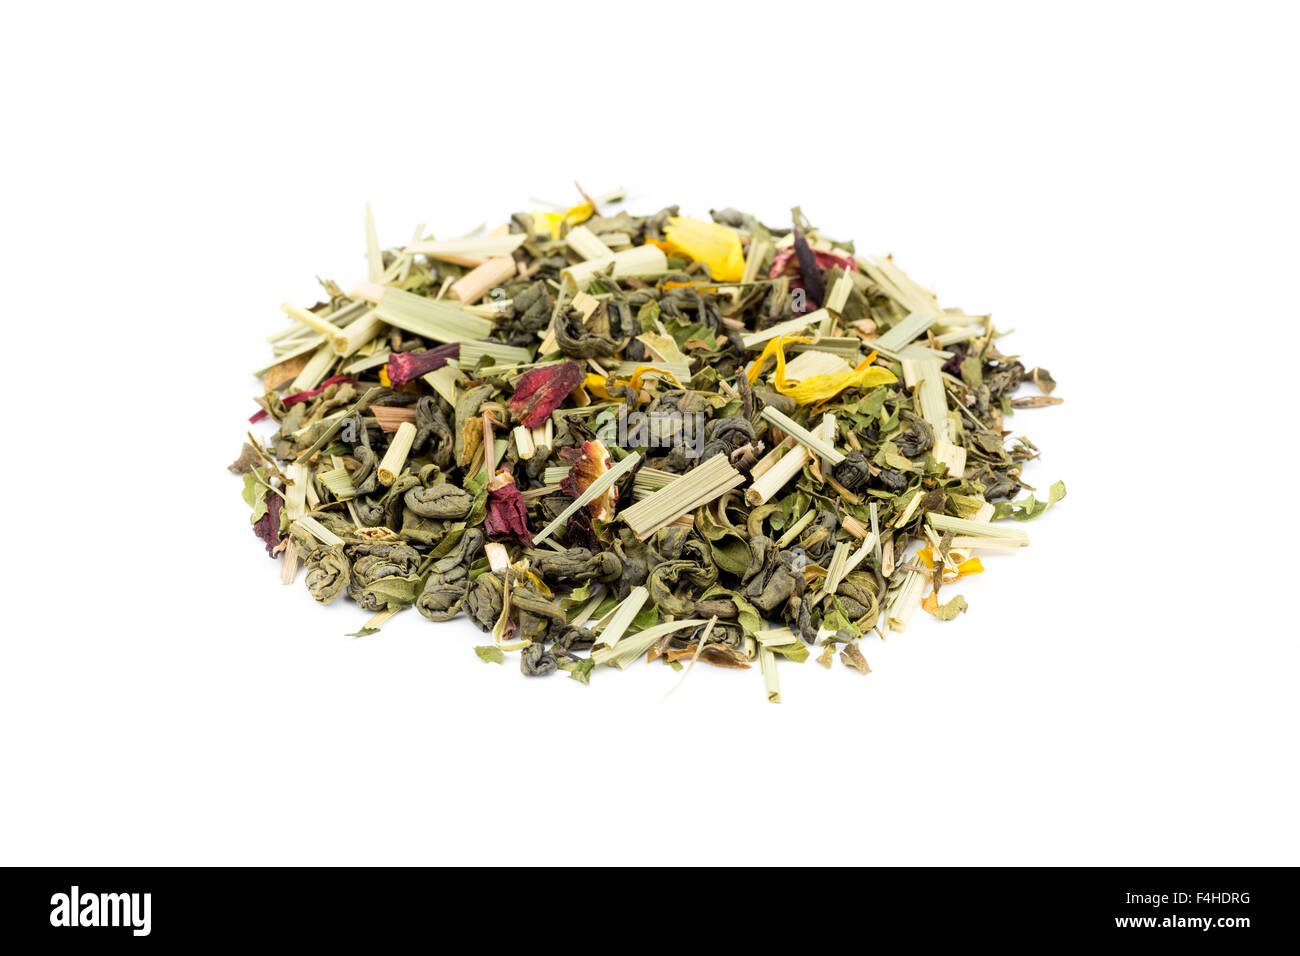 Heap of loose green tea rise and grind isolated on white background Stock Photo